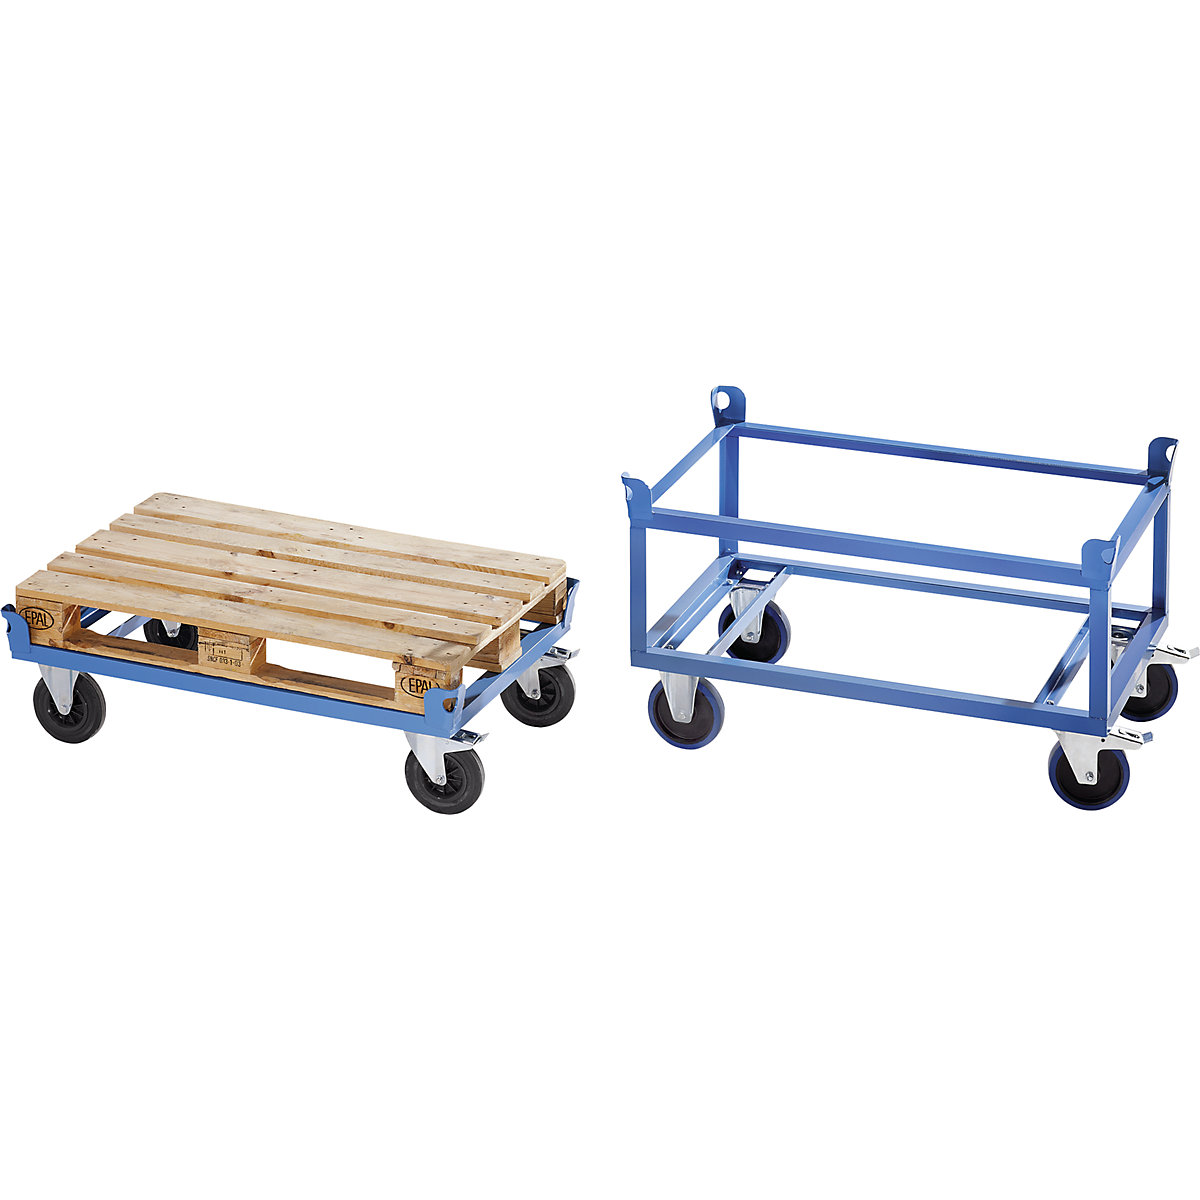 Steel wheeled base – eurokraft pro, for Euro pallets, max. load 500 kg, loading height 650 mm, blue, 10+ items-1